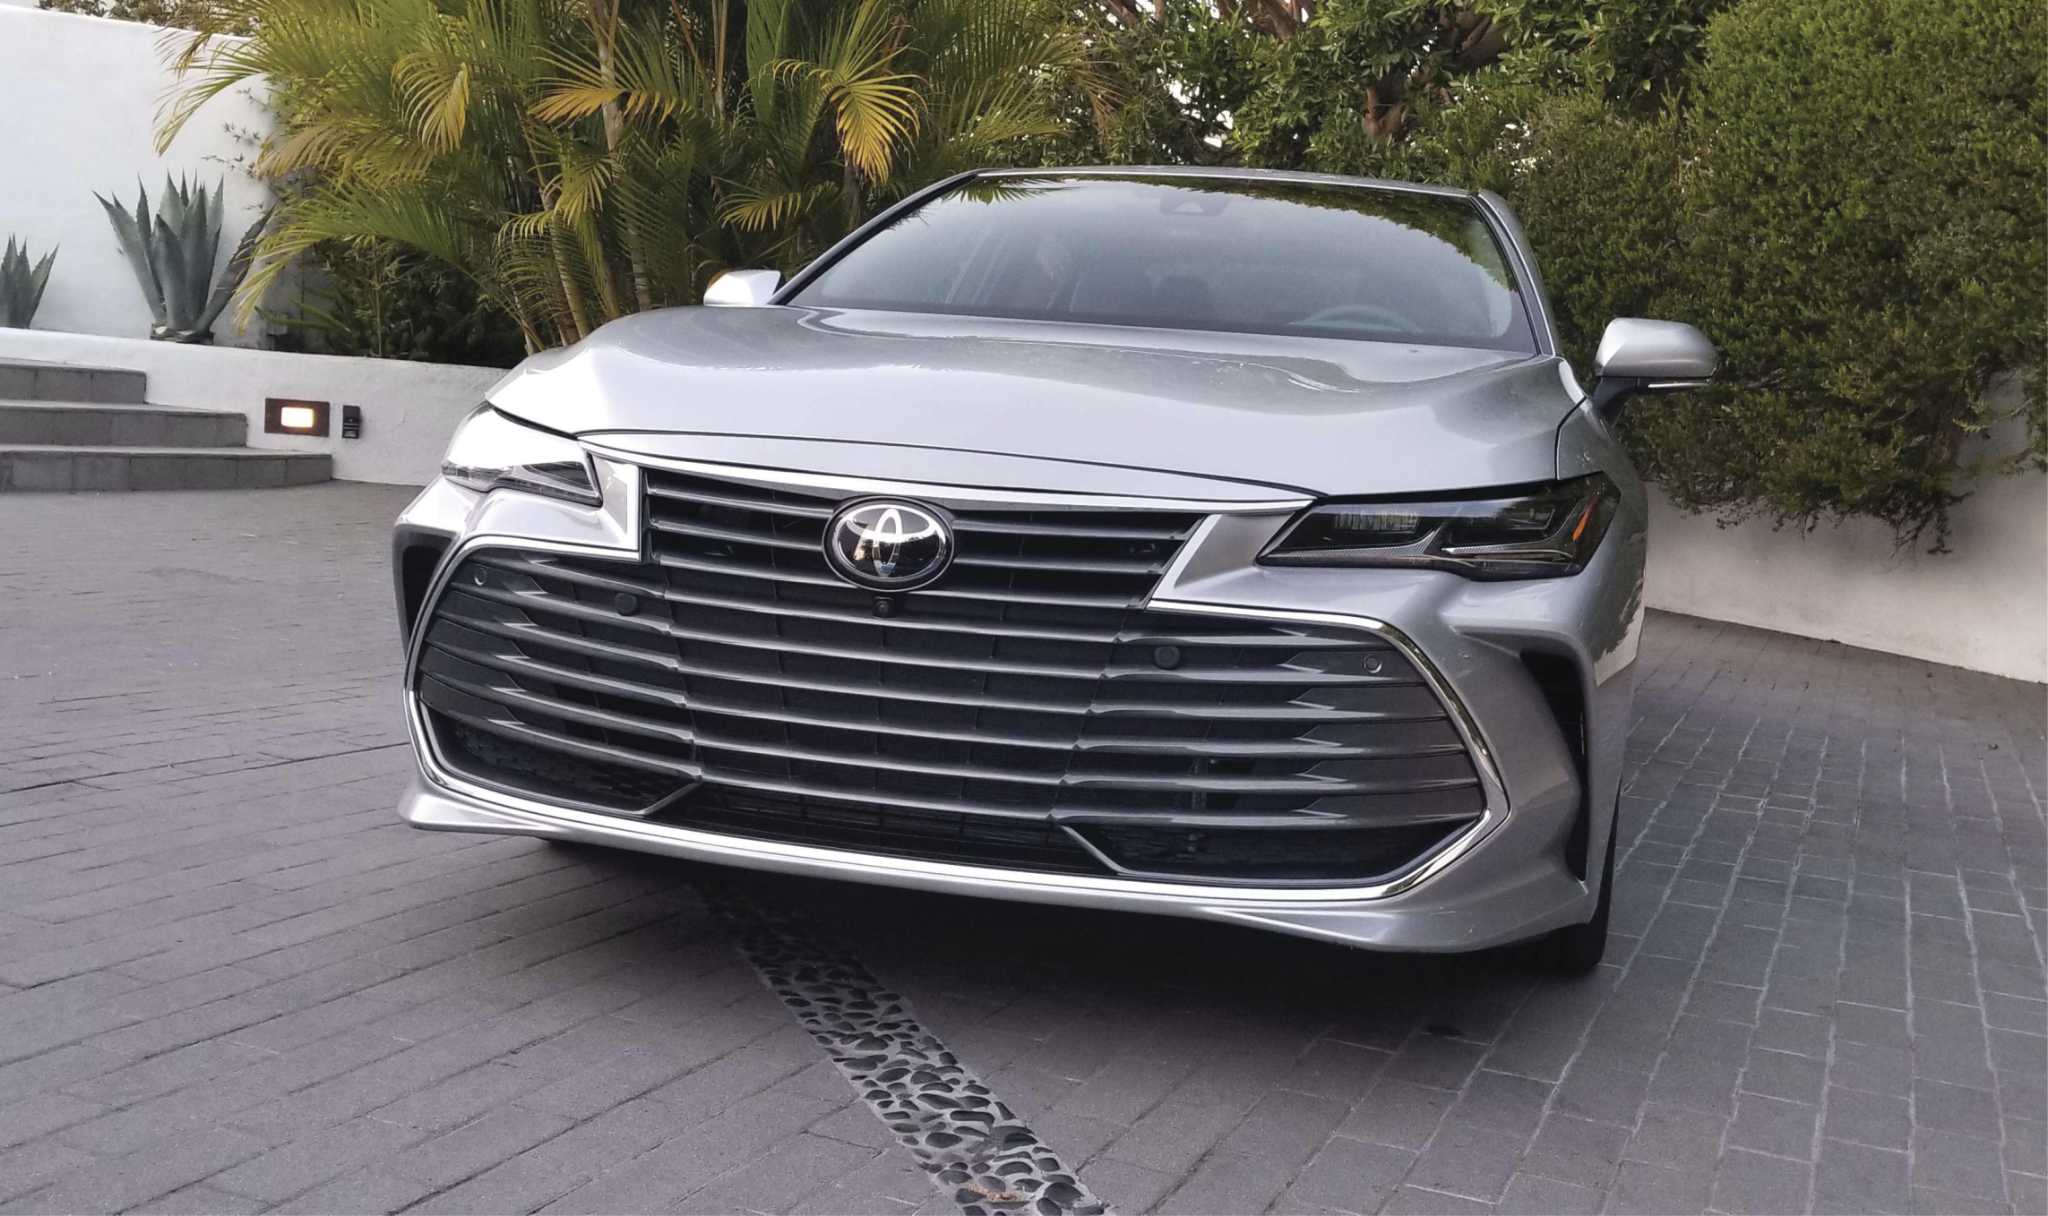 Toyota’s all-new 2019 Avalon hits dealerships in May - Houston Chronicle2048 x 1216